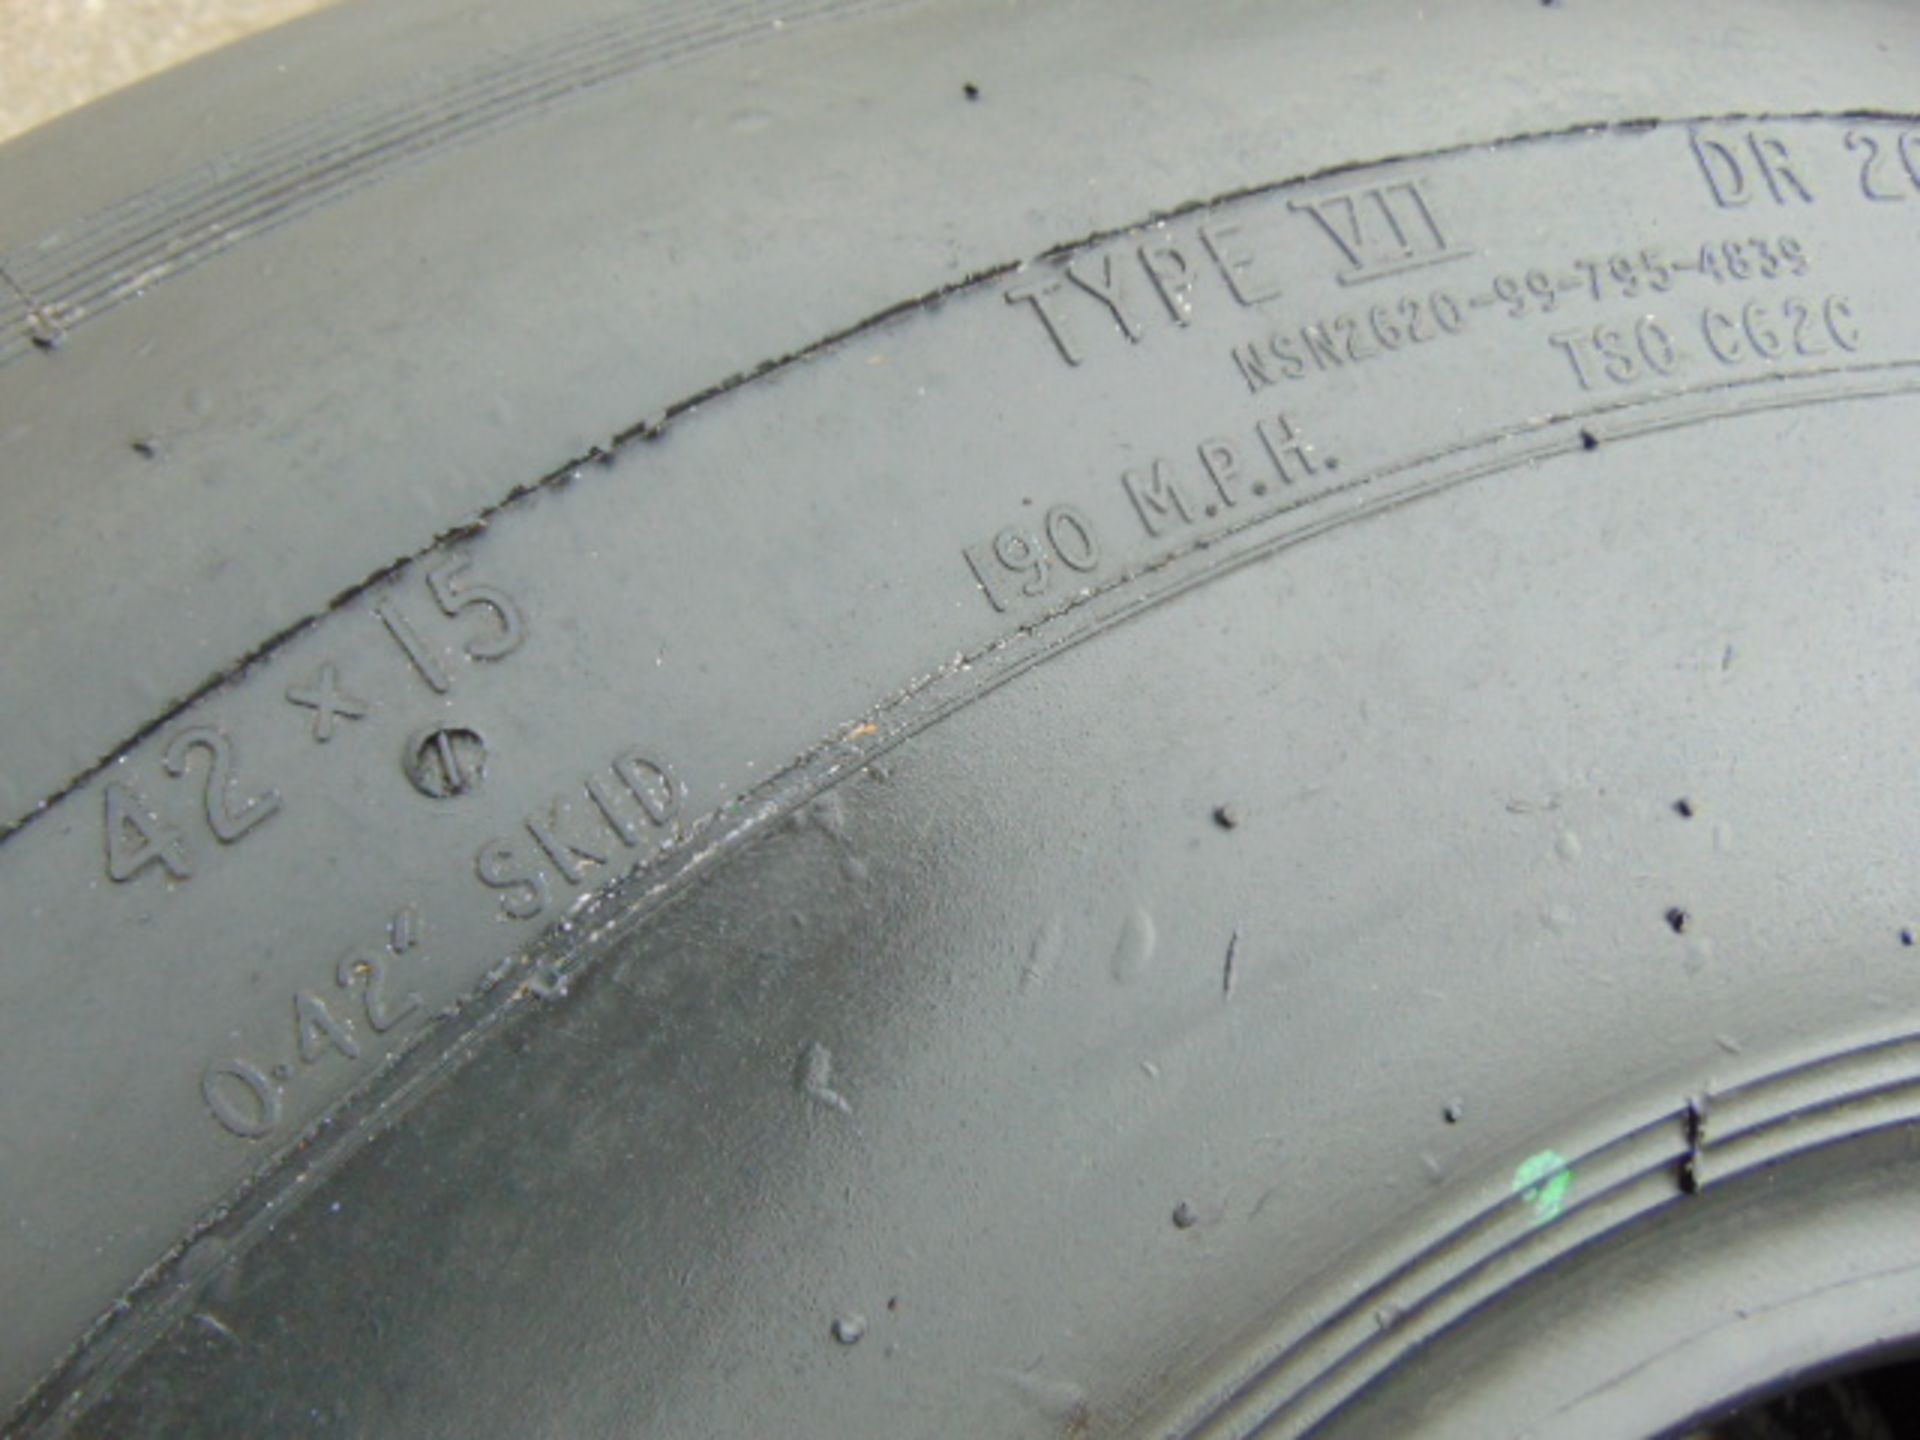 Dunlop CR-4 VC10 Aircraft Tyre - Image 5 of 5